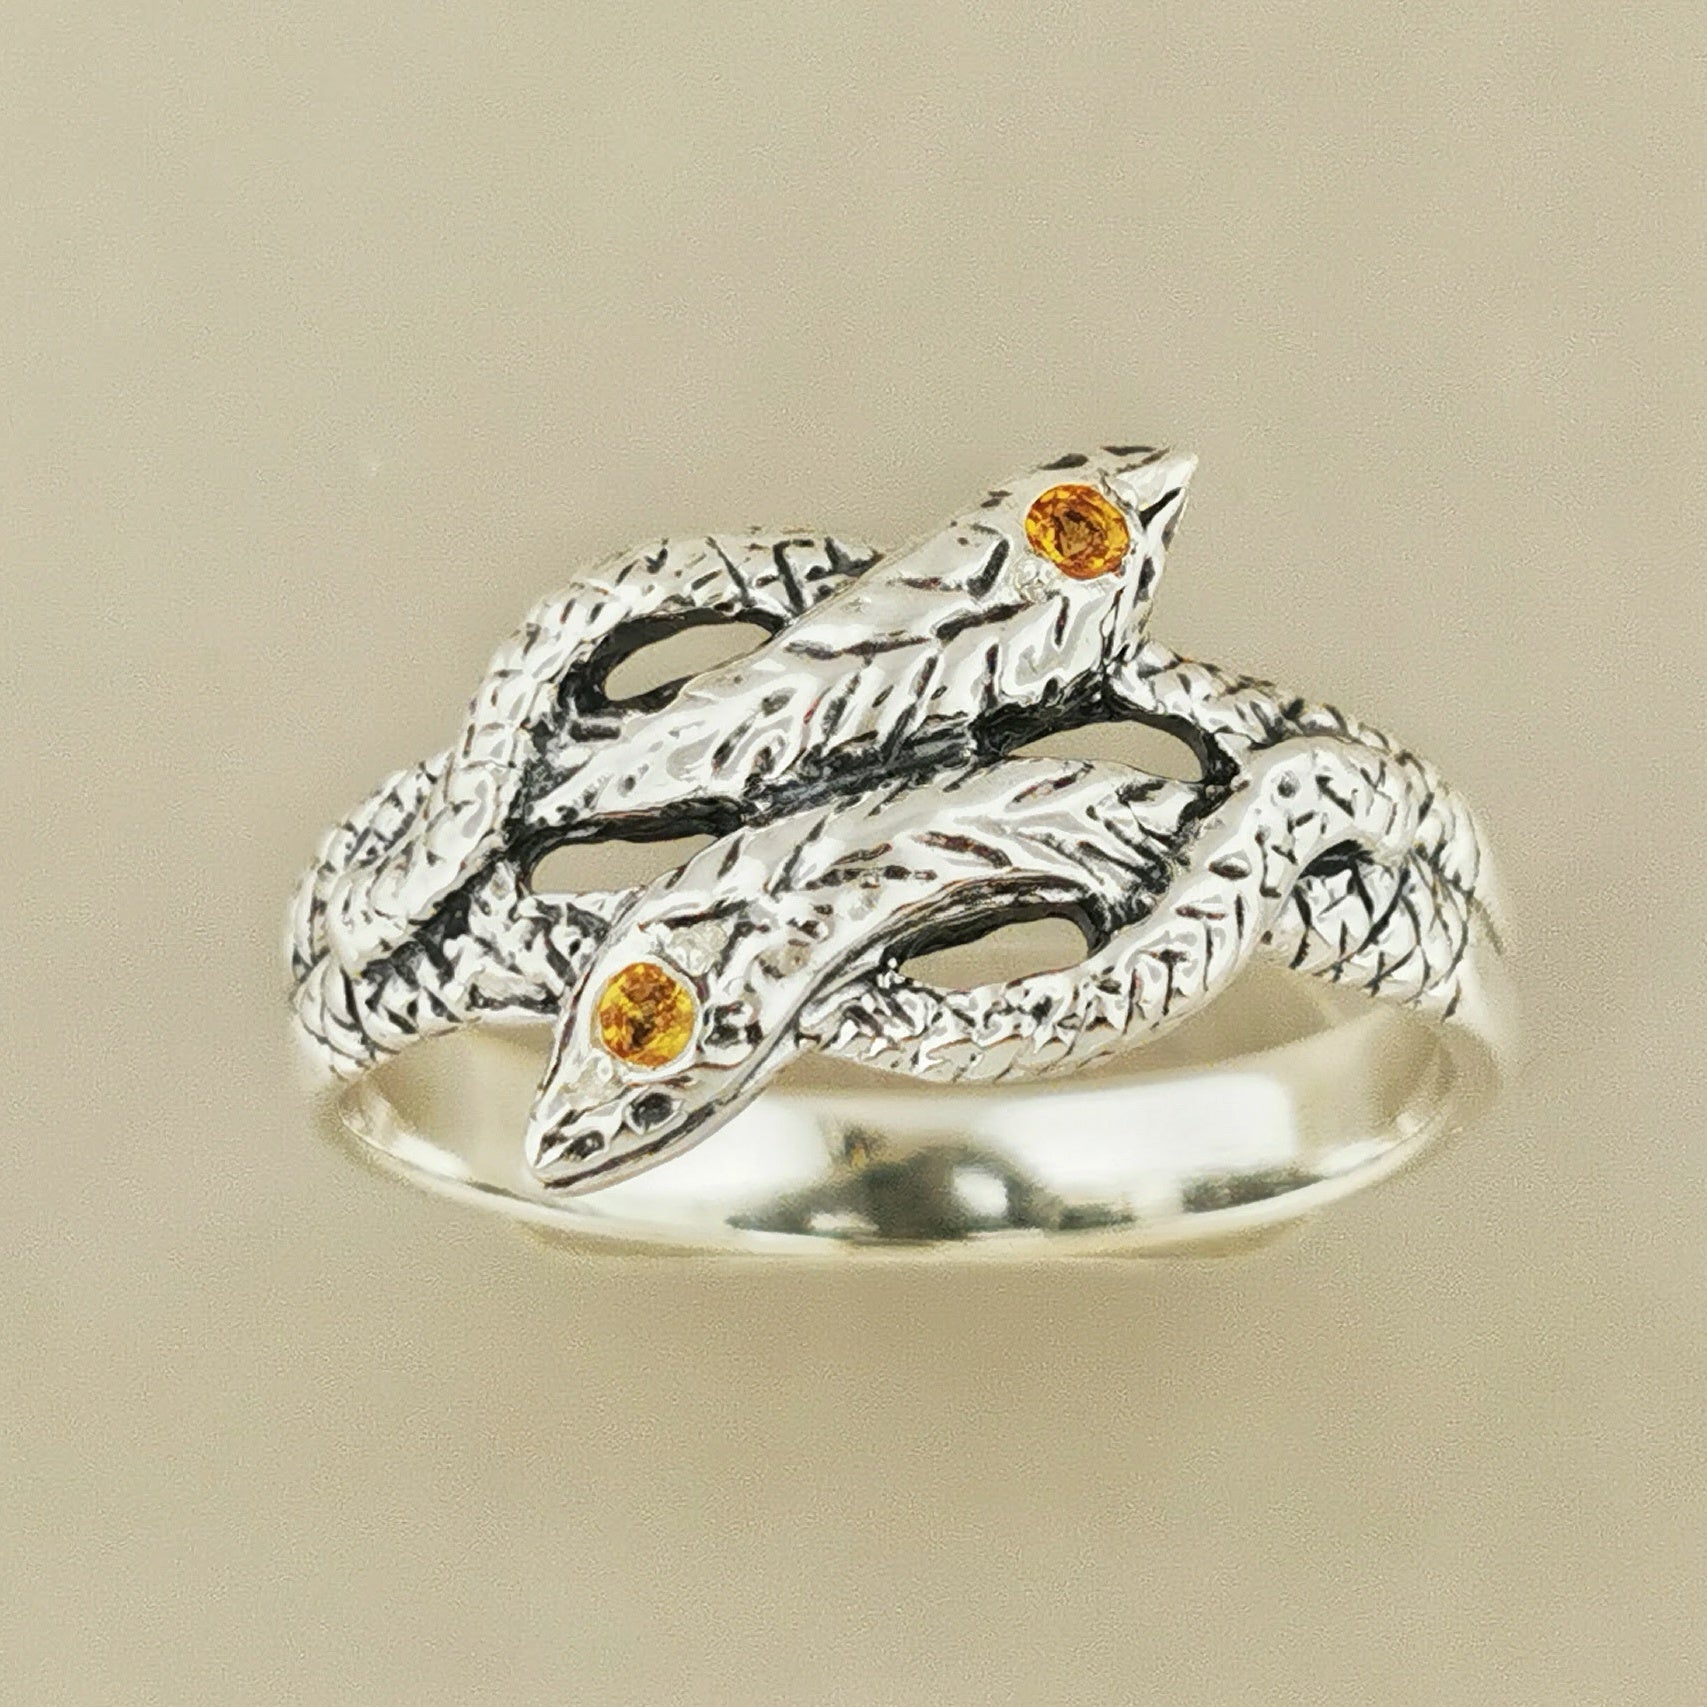 Coiled Twin Snake Ring with Gemstones in 925 Sterling Silver, Birthstone Snake Ring, Handmade Snake Jewelry, Mid Century Retro Snake Ring, Birthstone Snake Ring, Two Snakes Ring, Twin Snake Ring, Sterling Silver Snake Ring, Silver Serpent Ring